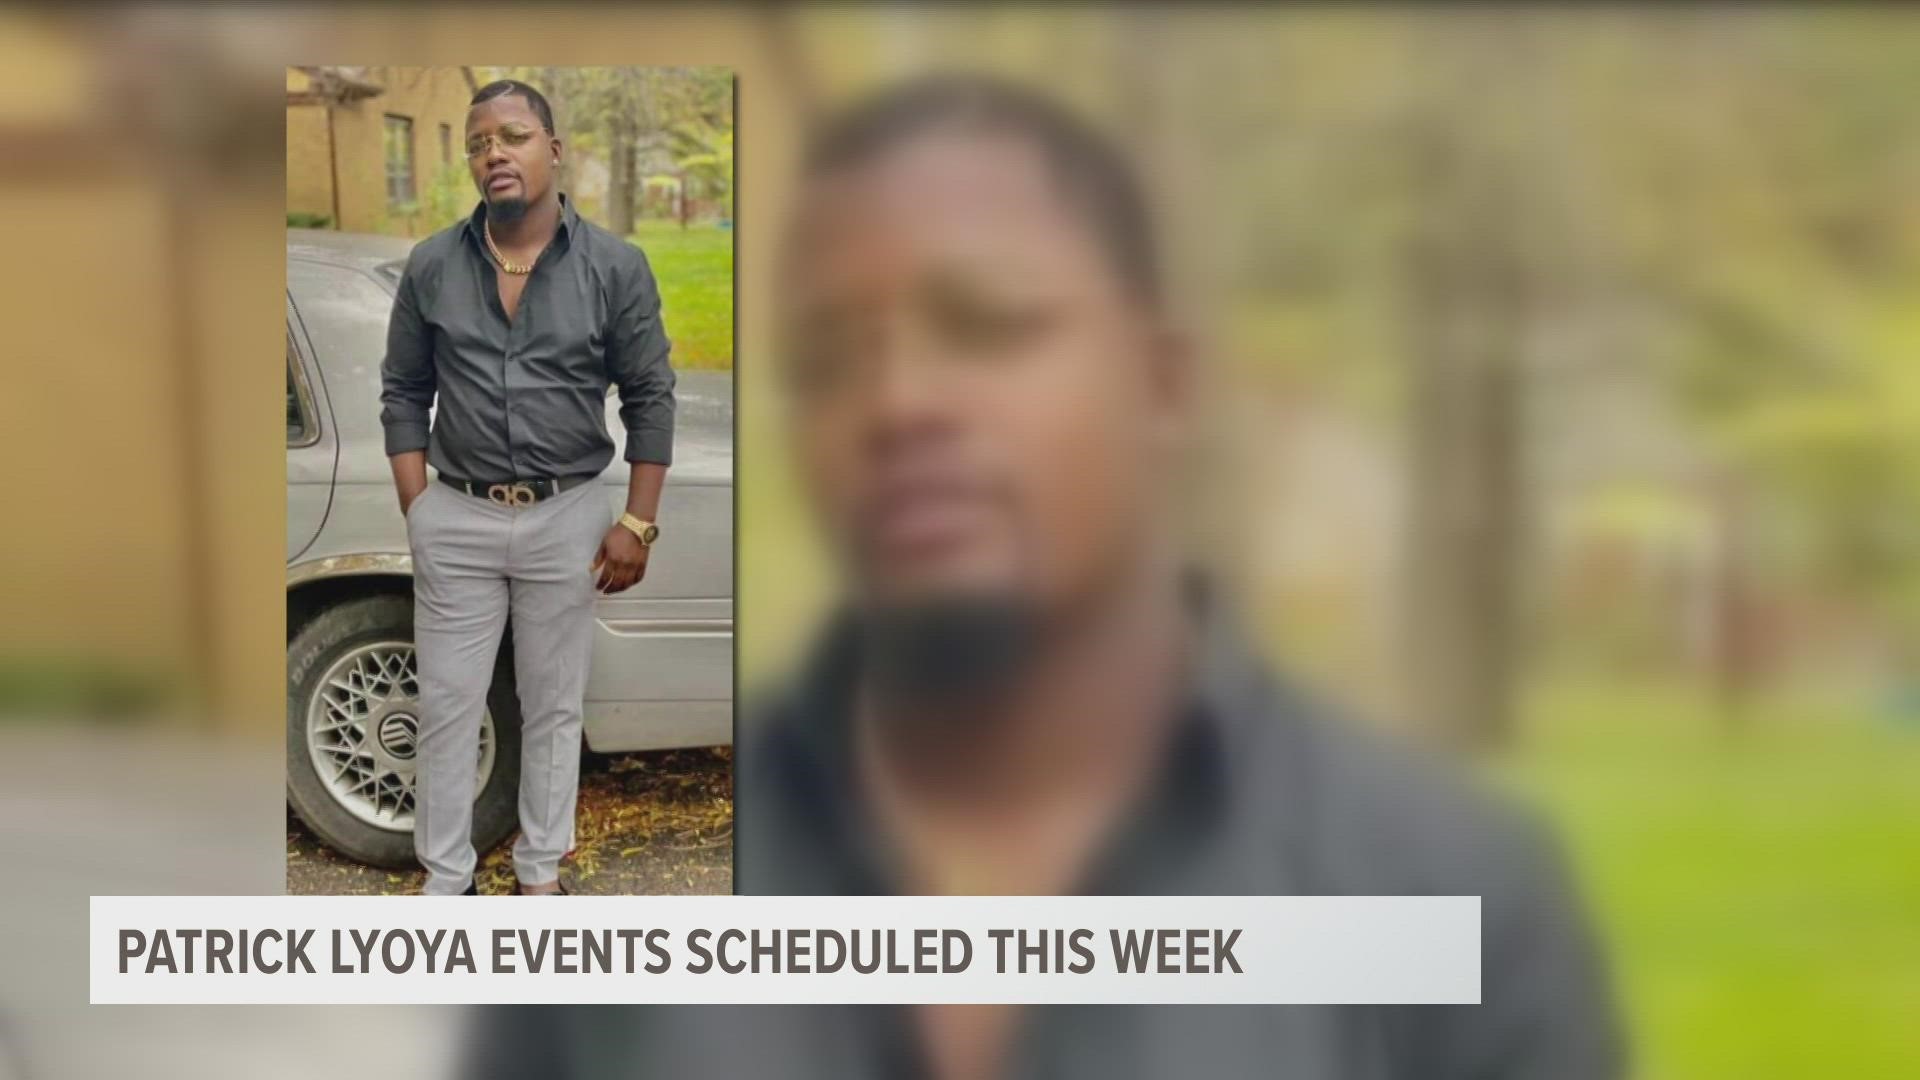 It has been two weeks since Patrick Lyoya was killed by a police officer. Here's a look at events scheduled for this week, and what's next in the investigation.